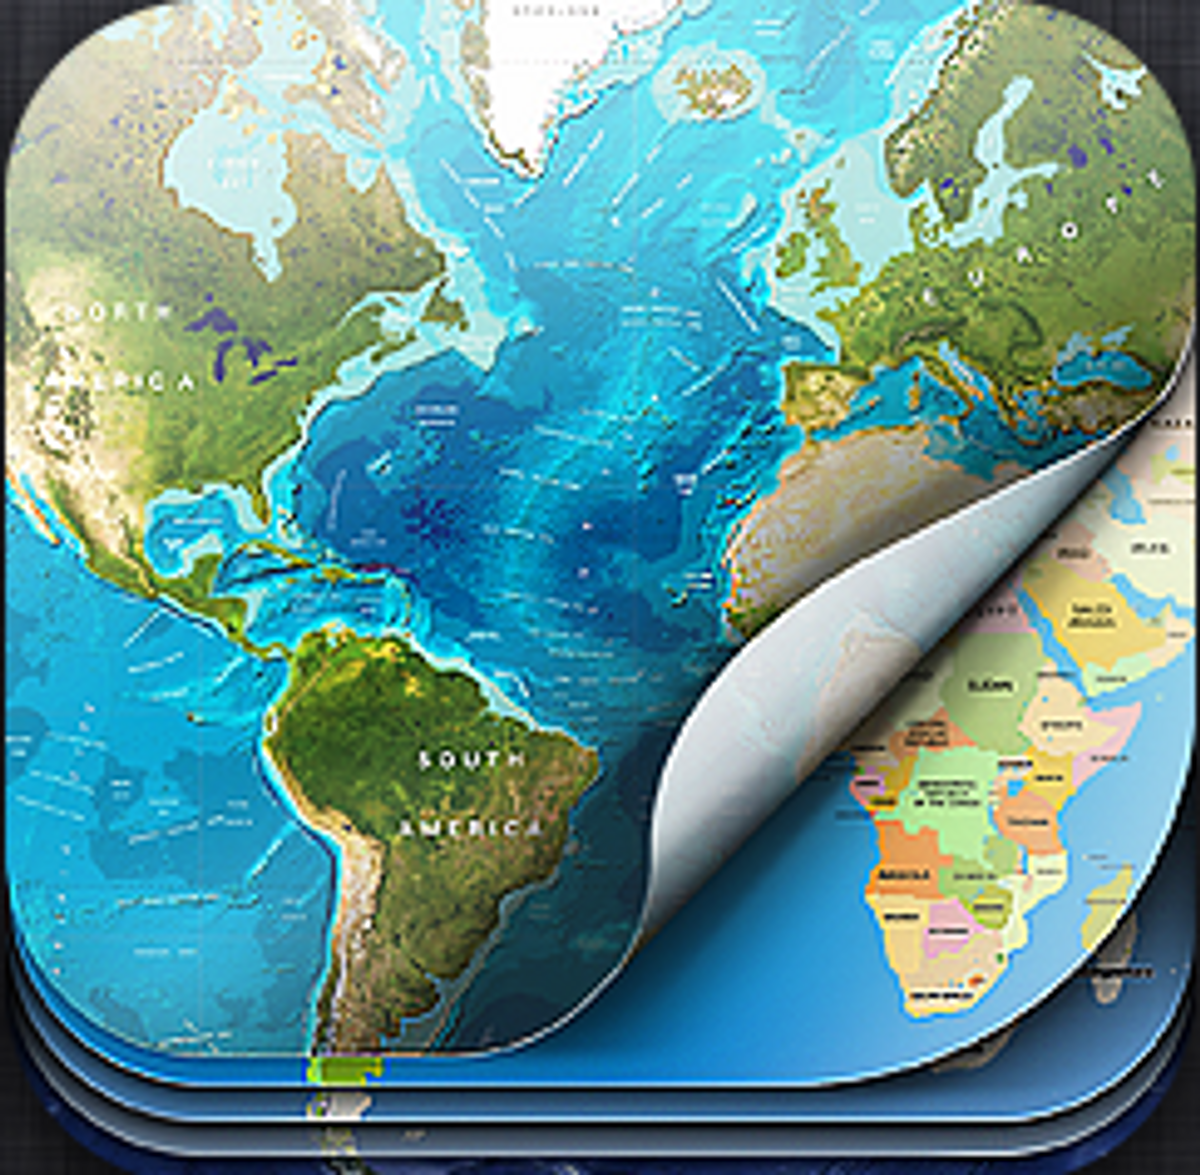 Mapple: Cartography For iOS